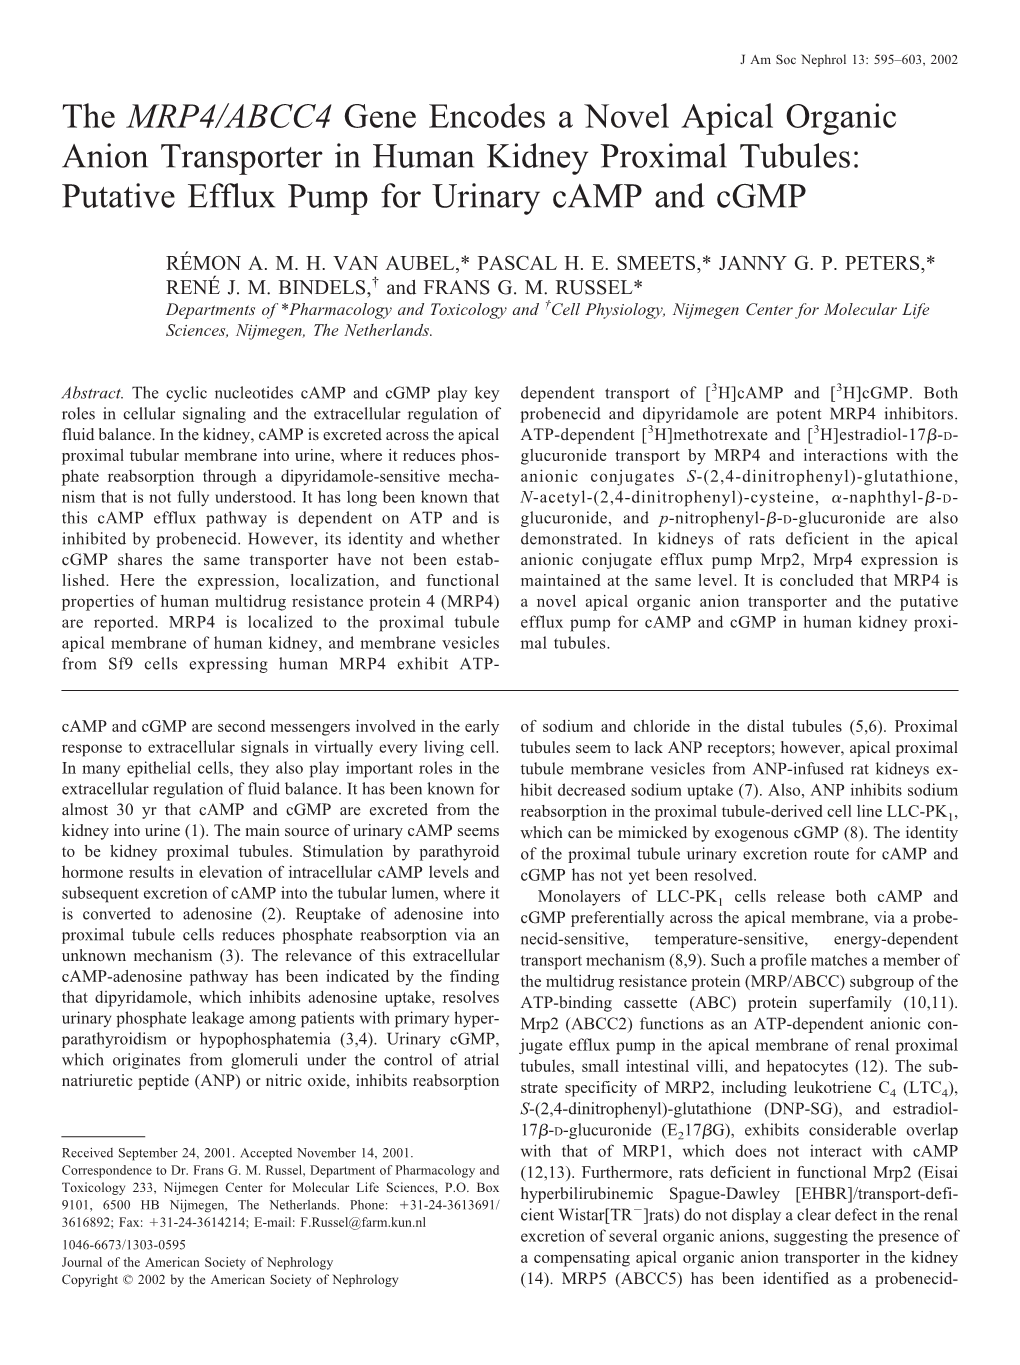 The MRP4/ABCC4 Gene Encodes a Novel Apical Organic Anion Transporter in Human Kidney Proximal Tubules: Putative Efflux Pump for Urinary Camp and Cgmp